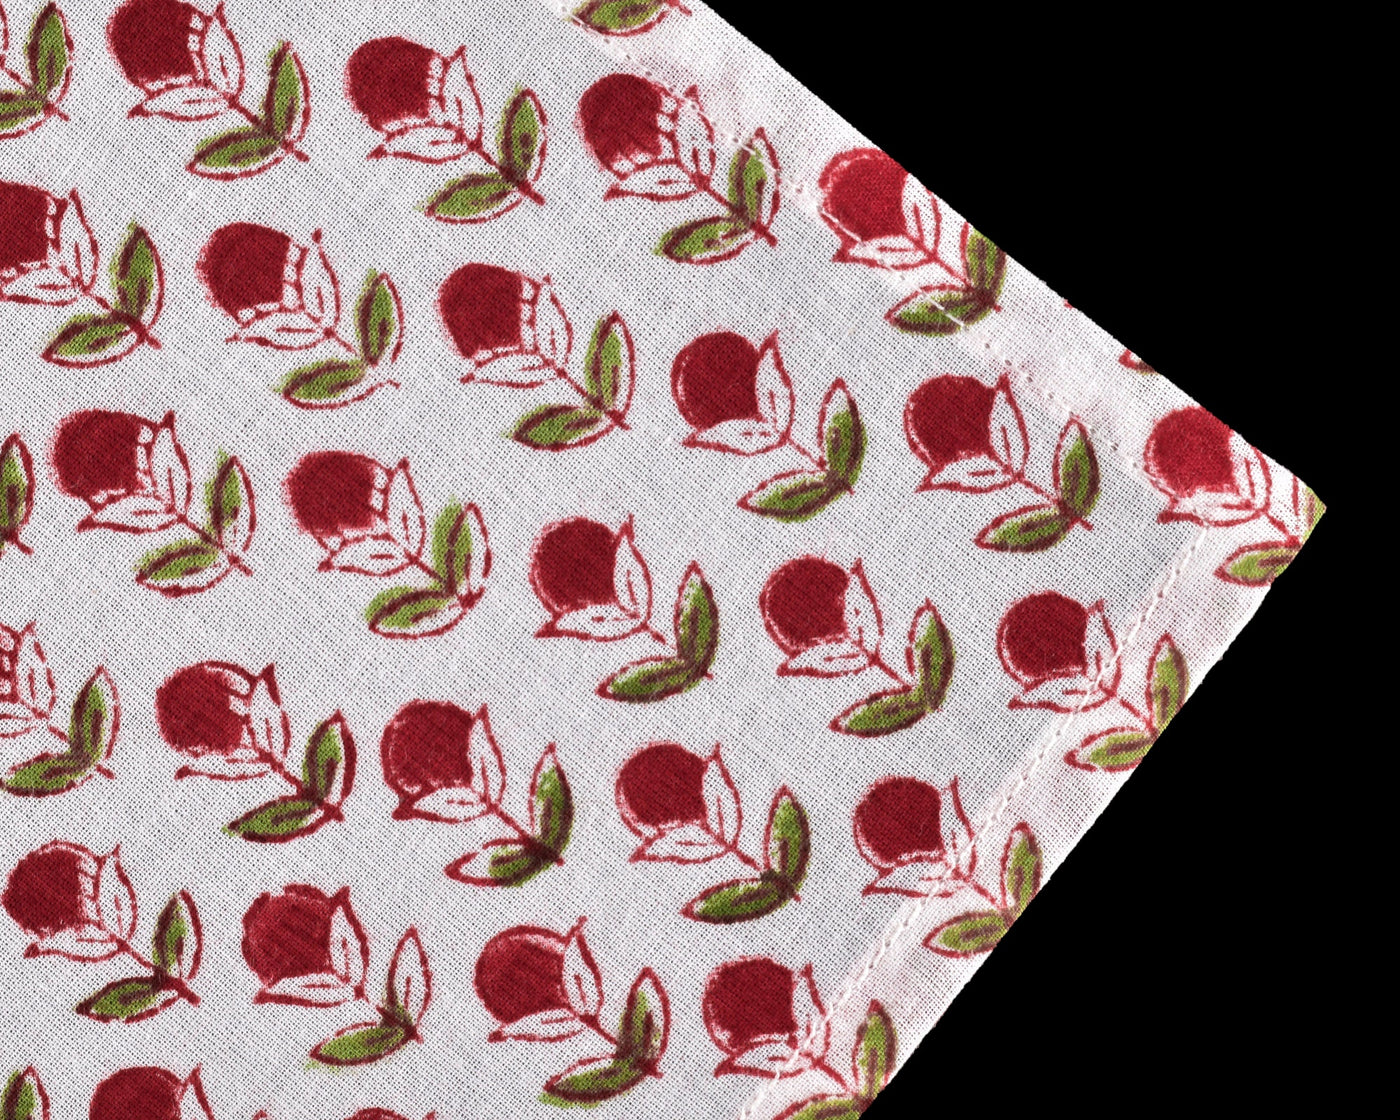 Vermilion Red and Army Green Indian Floral Hand Block Printed 100% Pure Cotton Cloth Napkins, 18x18"- Cocktail Napkin, 20x20"- Dinner Napkins